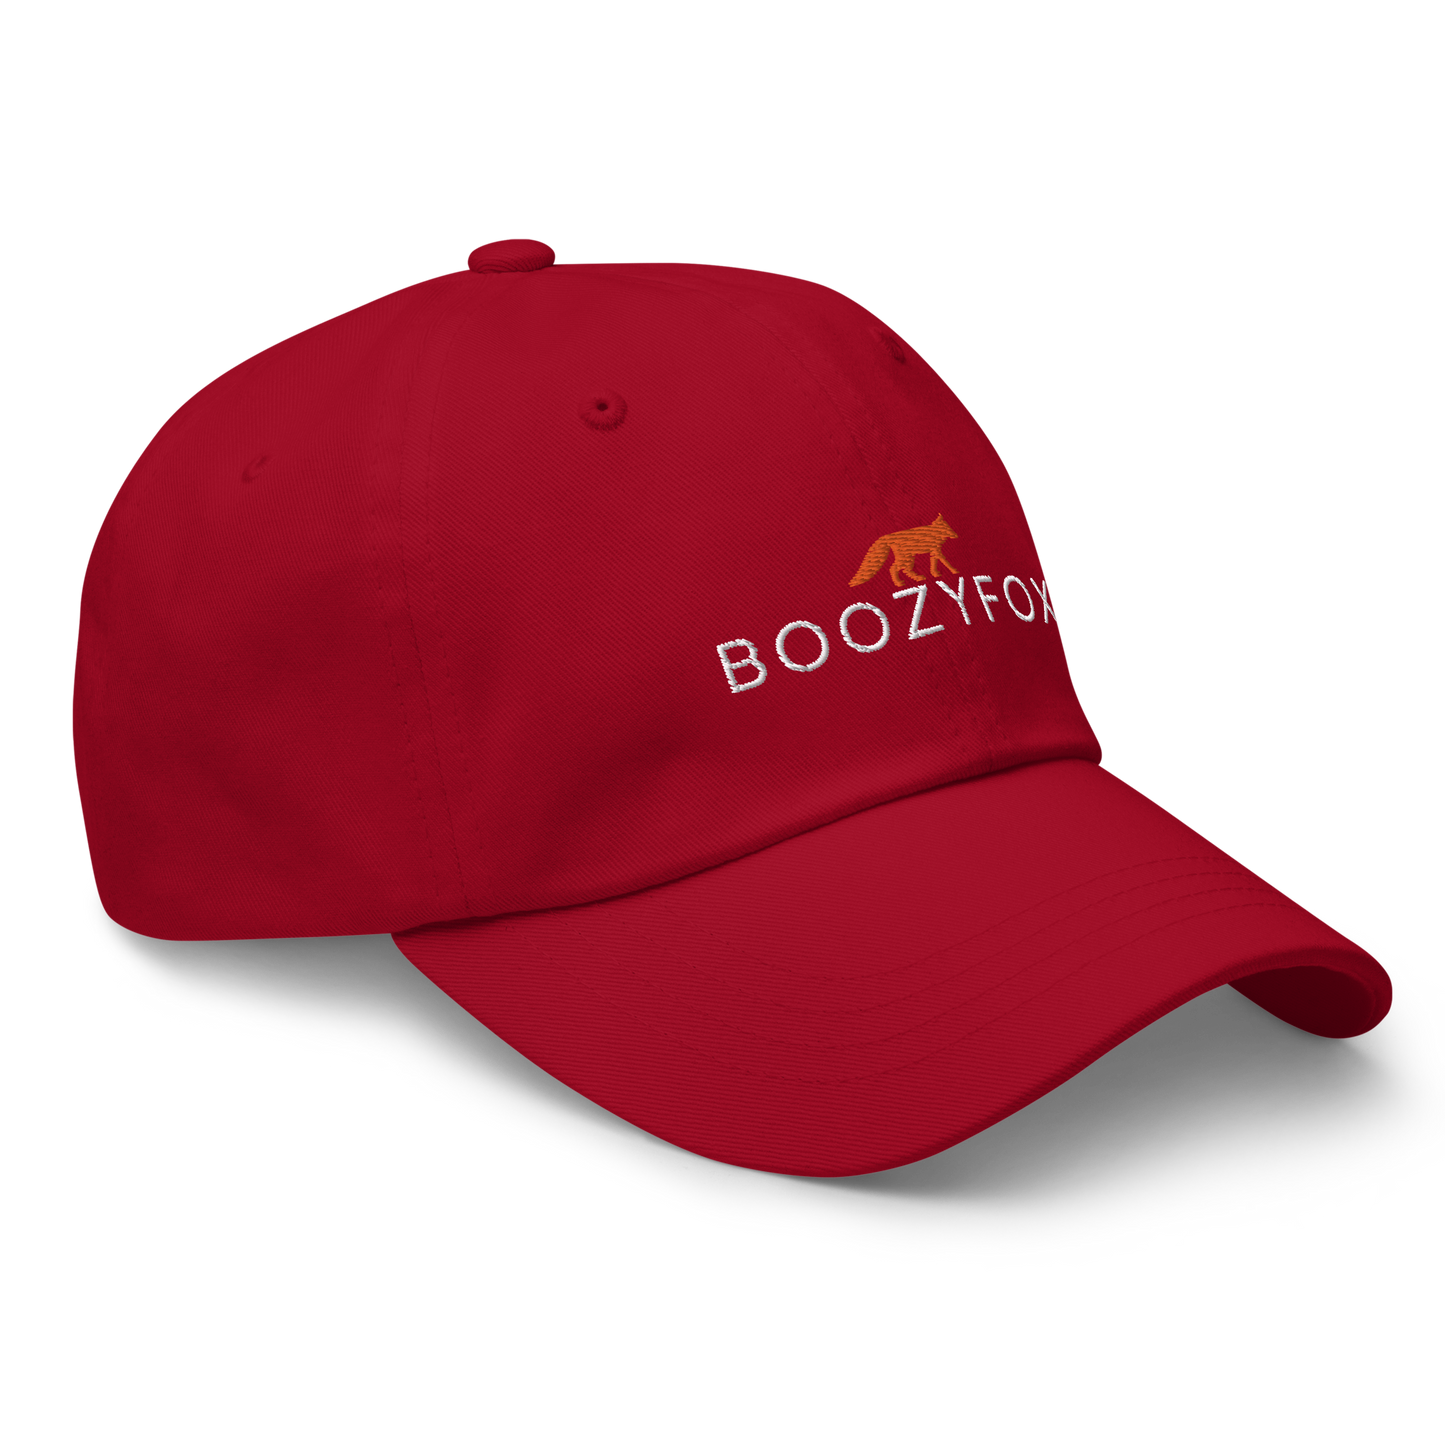 Cool Cranberry Red Dad Hat featuring an embroidered Boozy Fox logo on front. Shop Cool Dad Hats & Dad Caps Online - Boozy Fox